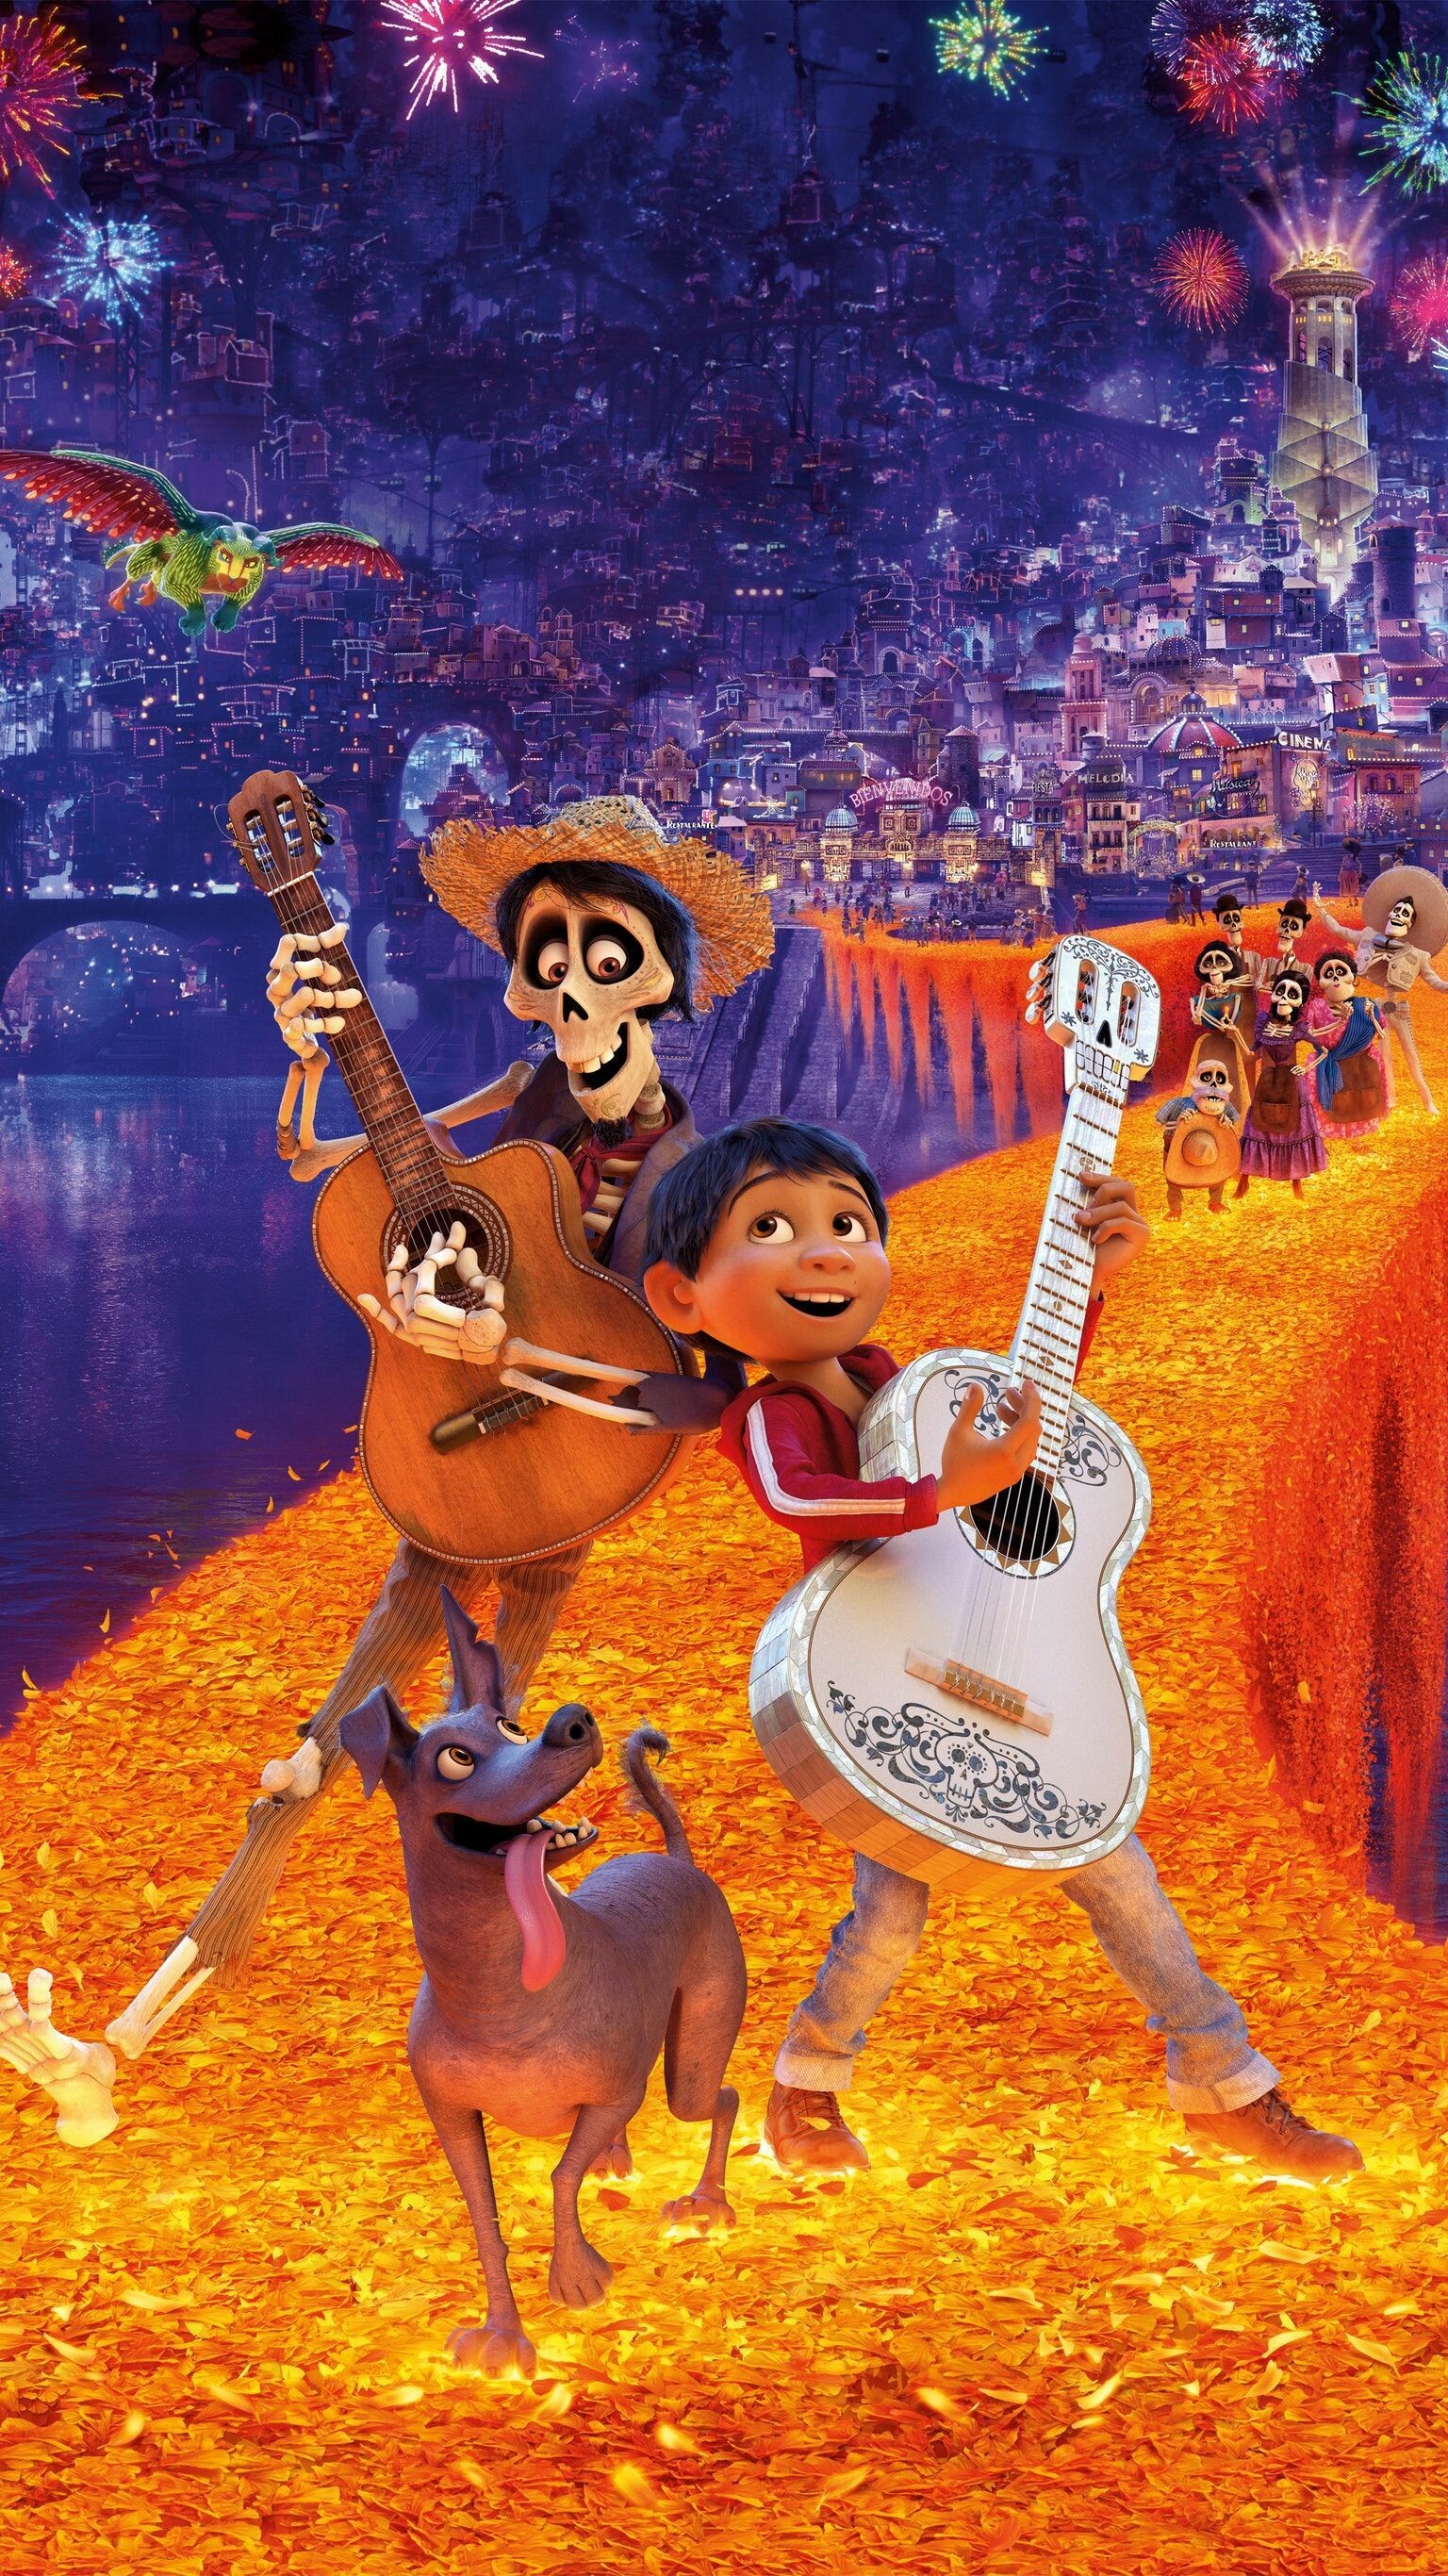 Coco (Cartoon): Composer Michael Giacchino, who had worked on prior Pixar animated features, composed the score. 1540x2740 HD Wallpaper.